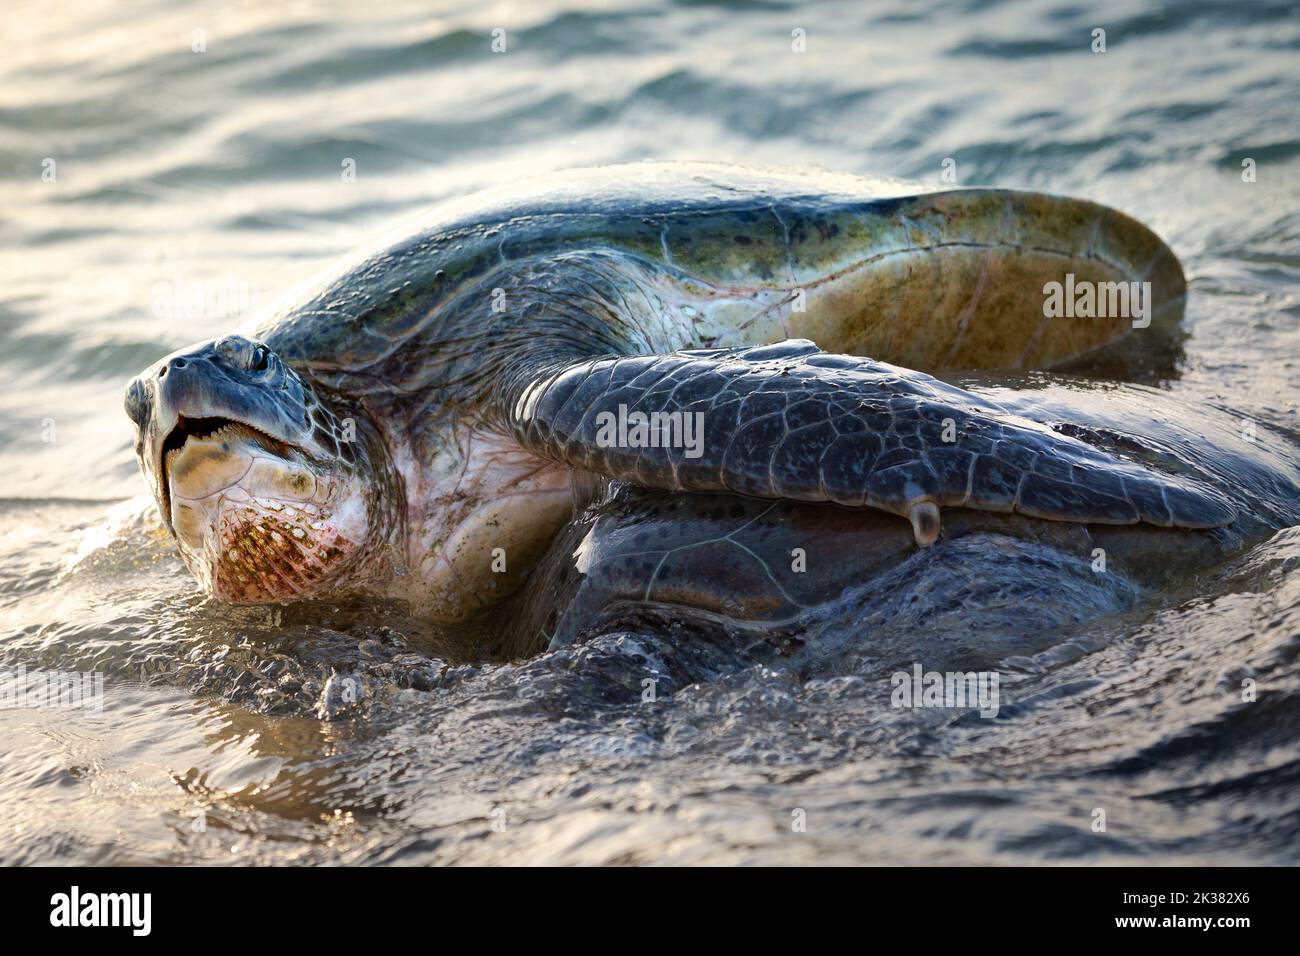 Turtles mating on the beach at the Ningaloo Reef in the Cape Range Nationalpark, Exmouth, Western Australia Stock Photo